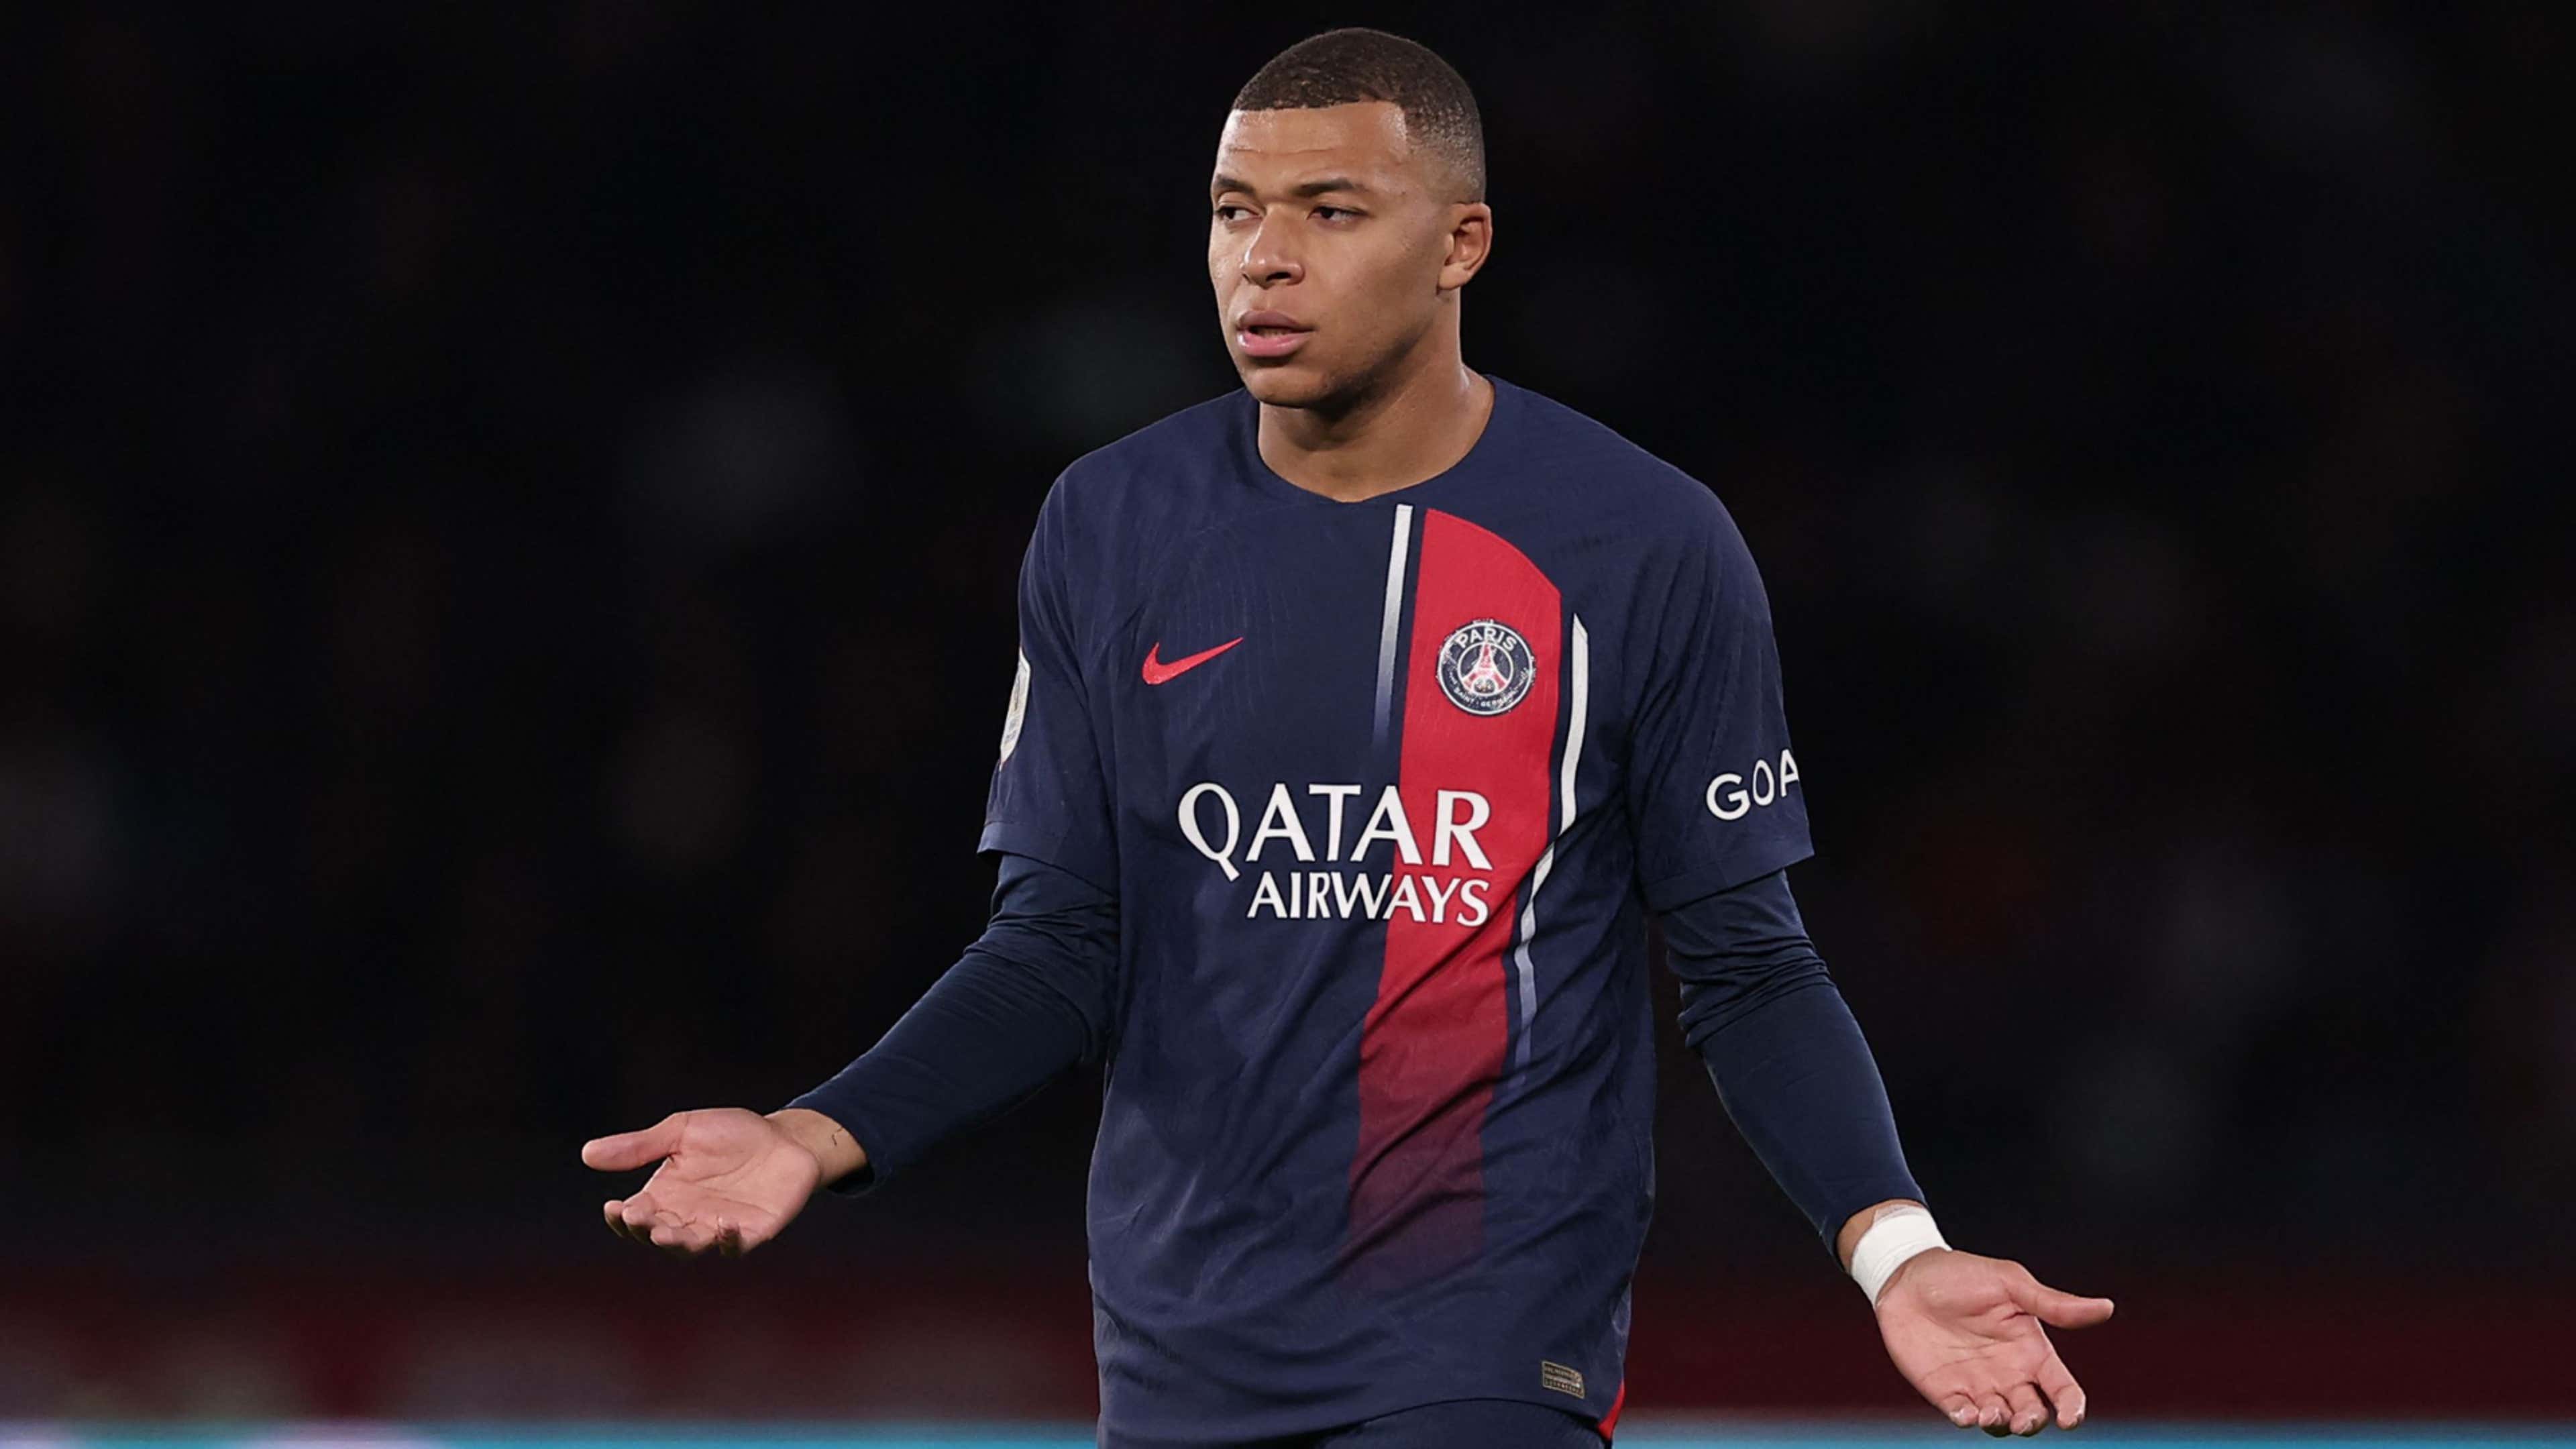 Kylian Mbappe transfer: Kylian Mbappe of PSG to sign biggest